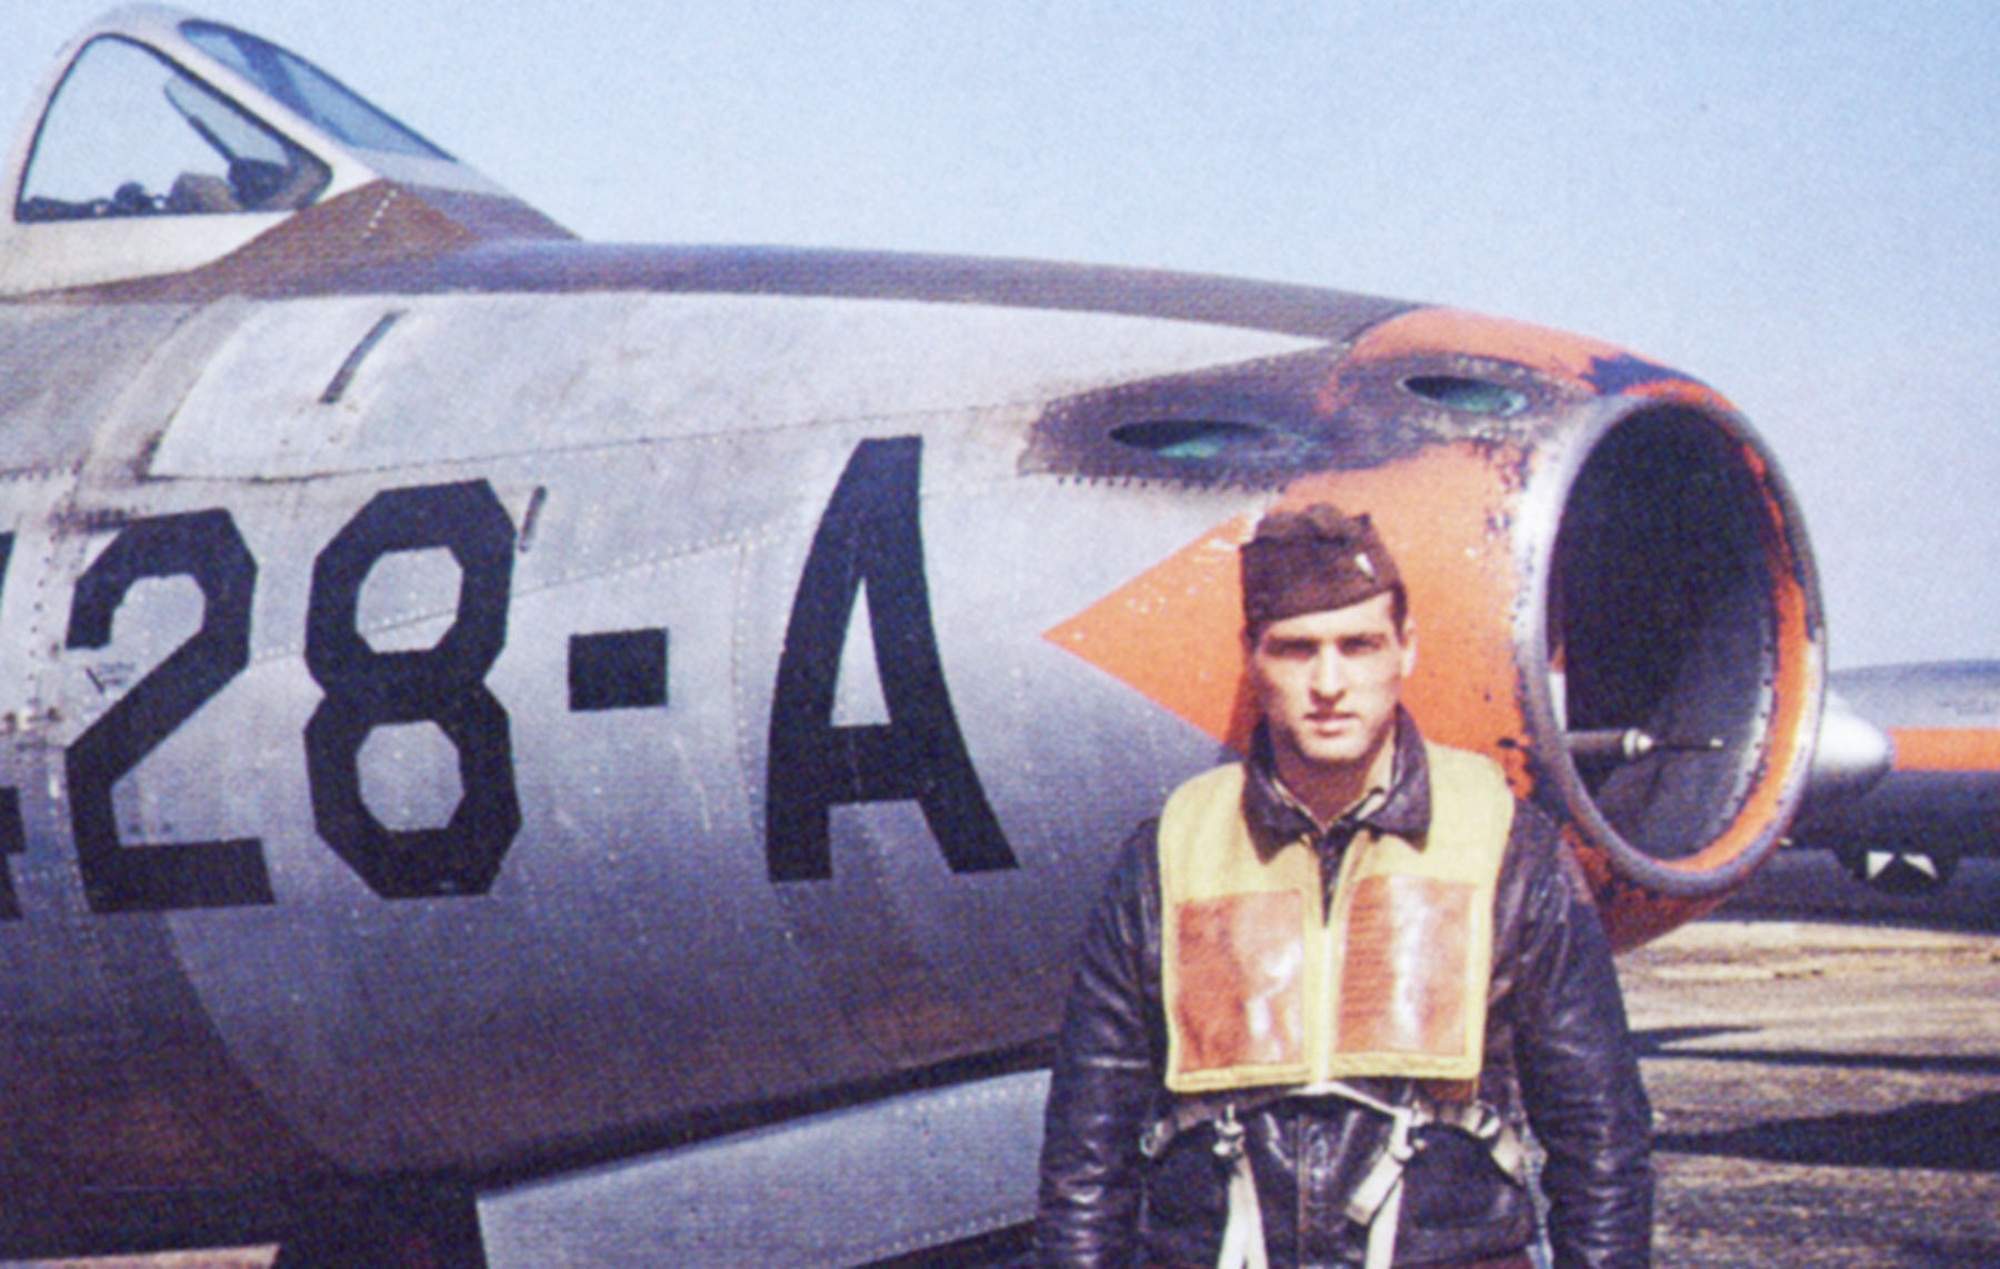 On Jan. 23, 1951, 1st Lt. Jacob Kratt of the 27th Fighter Escort Group performed the remarkable feat of downing two MiG-15s while flying an F-84. Three days later, he shot down a Yak-3, becoming the highest-scoring F-84 pilot of the Korean War. (U.S. Air Force photo)